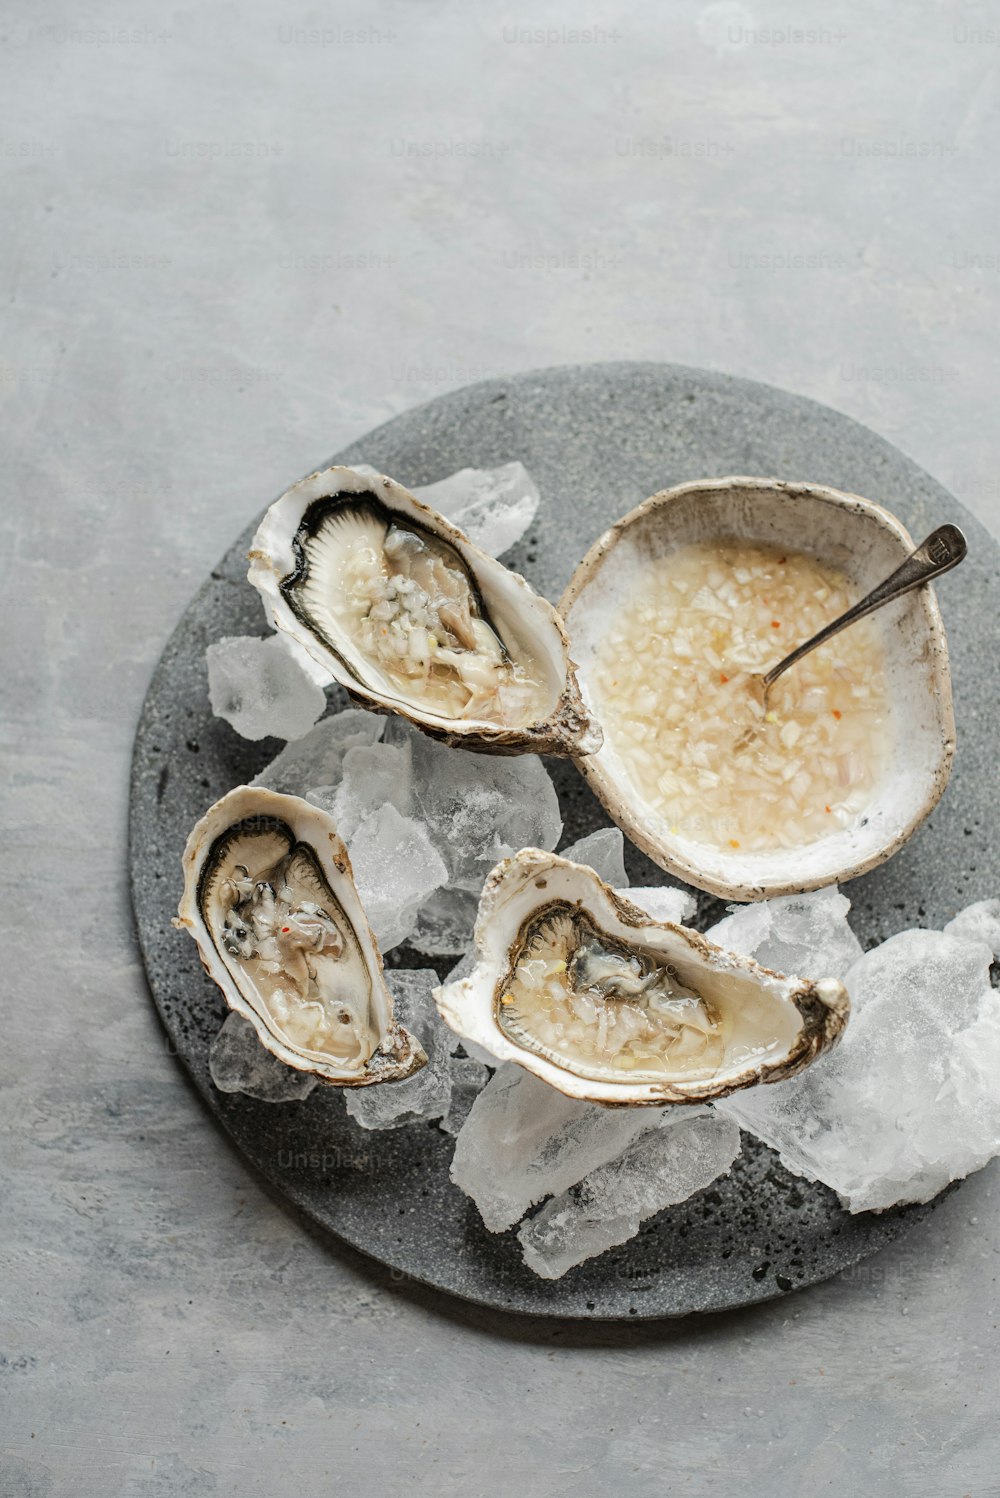 a plate of oysters on ice with a spoon